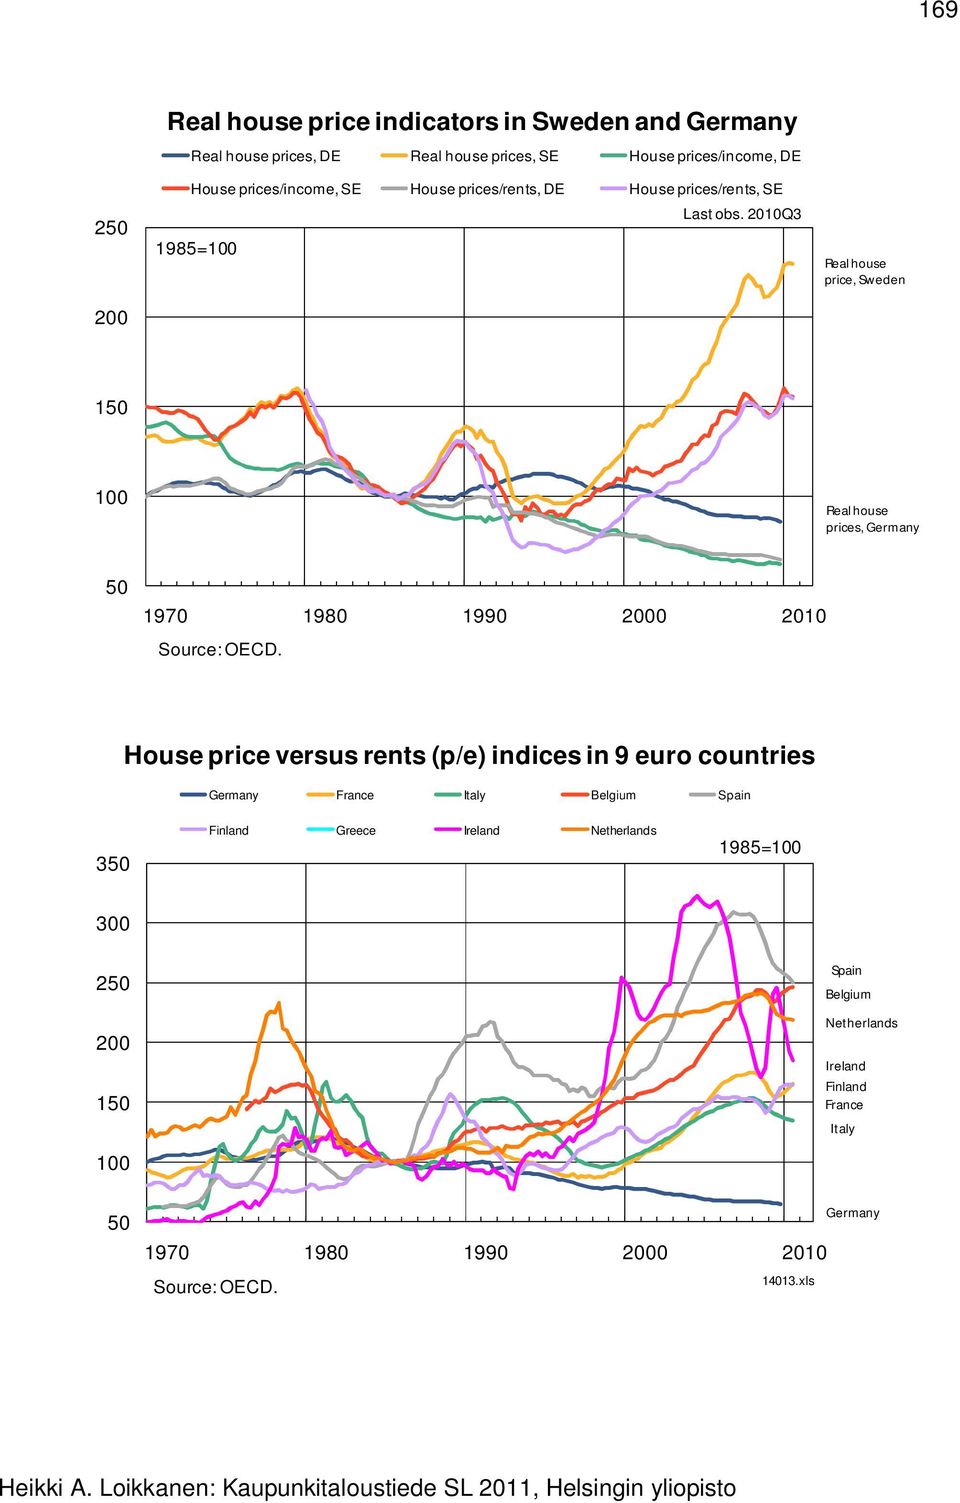 House price versus rents (p/e) indices in 9 euro countries Germany France Italy Belgium Spain 35 Finland Greece Ireland Netherlands 1985=1 3 25 2 15 Spain